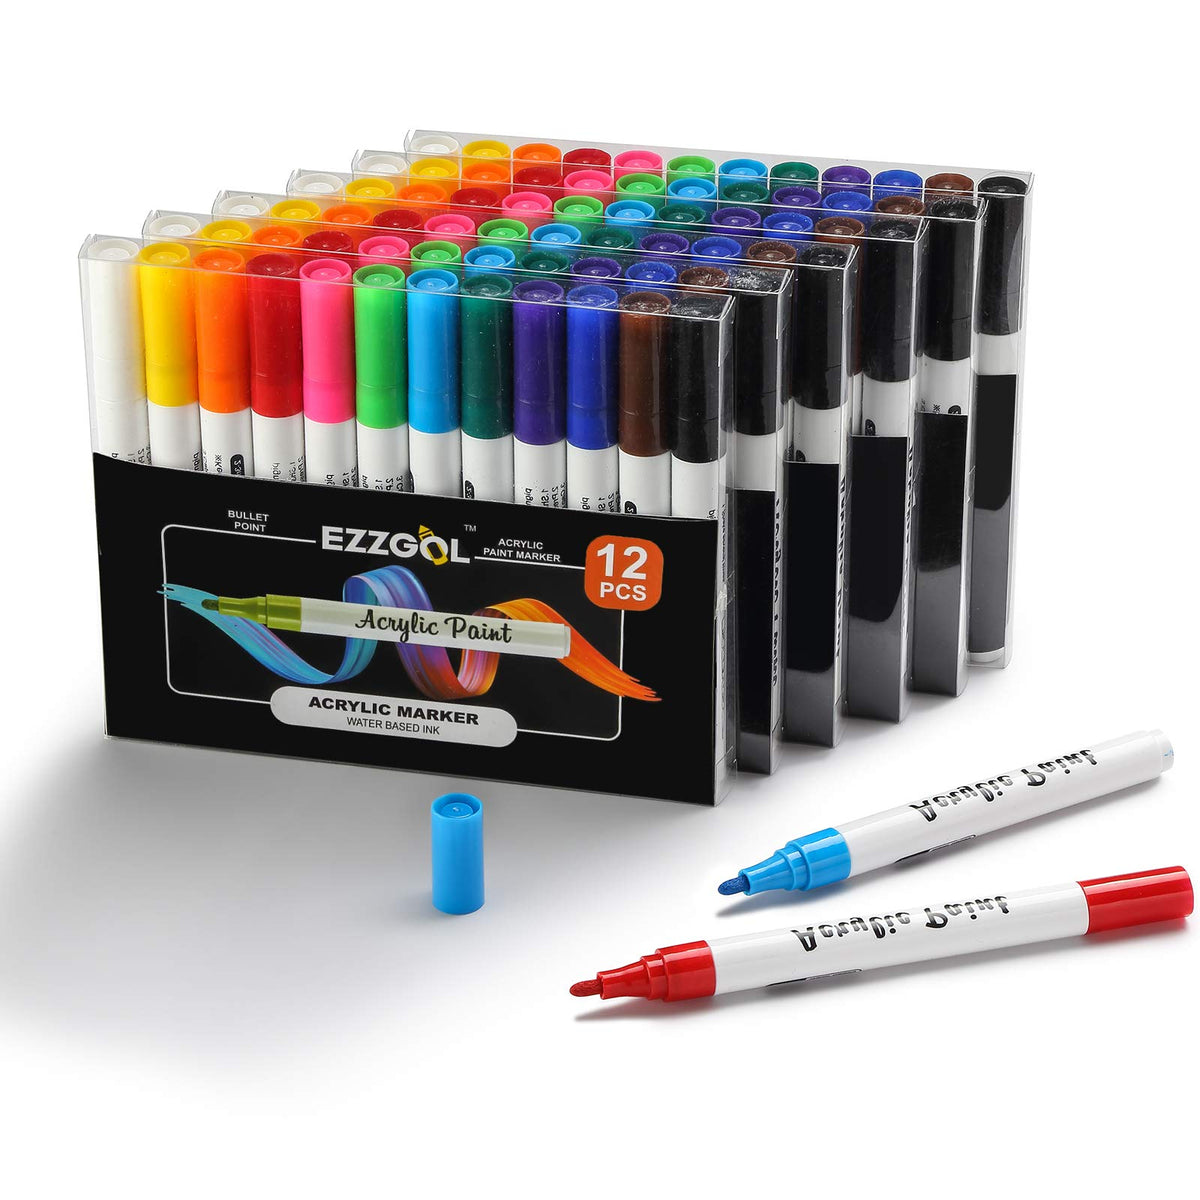 TOOLI-ART 36 Acrylic Paint Pens Skin and Earth Tones Marker Set 0.7mm Extra Fine Tip for Rock Painting, Canvas, Most surfaces. Non-Toxic, Quick Dry